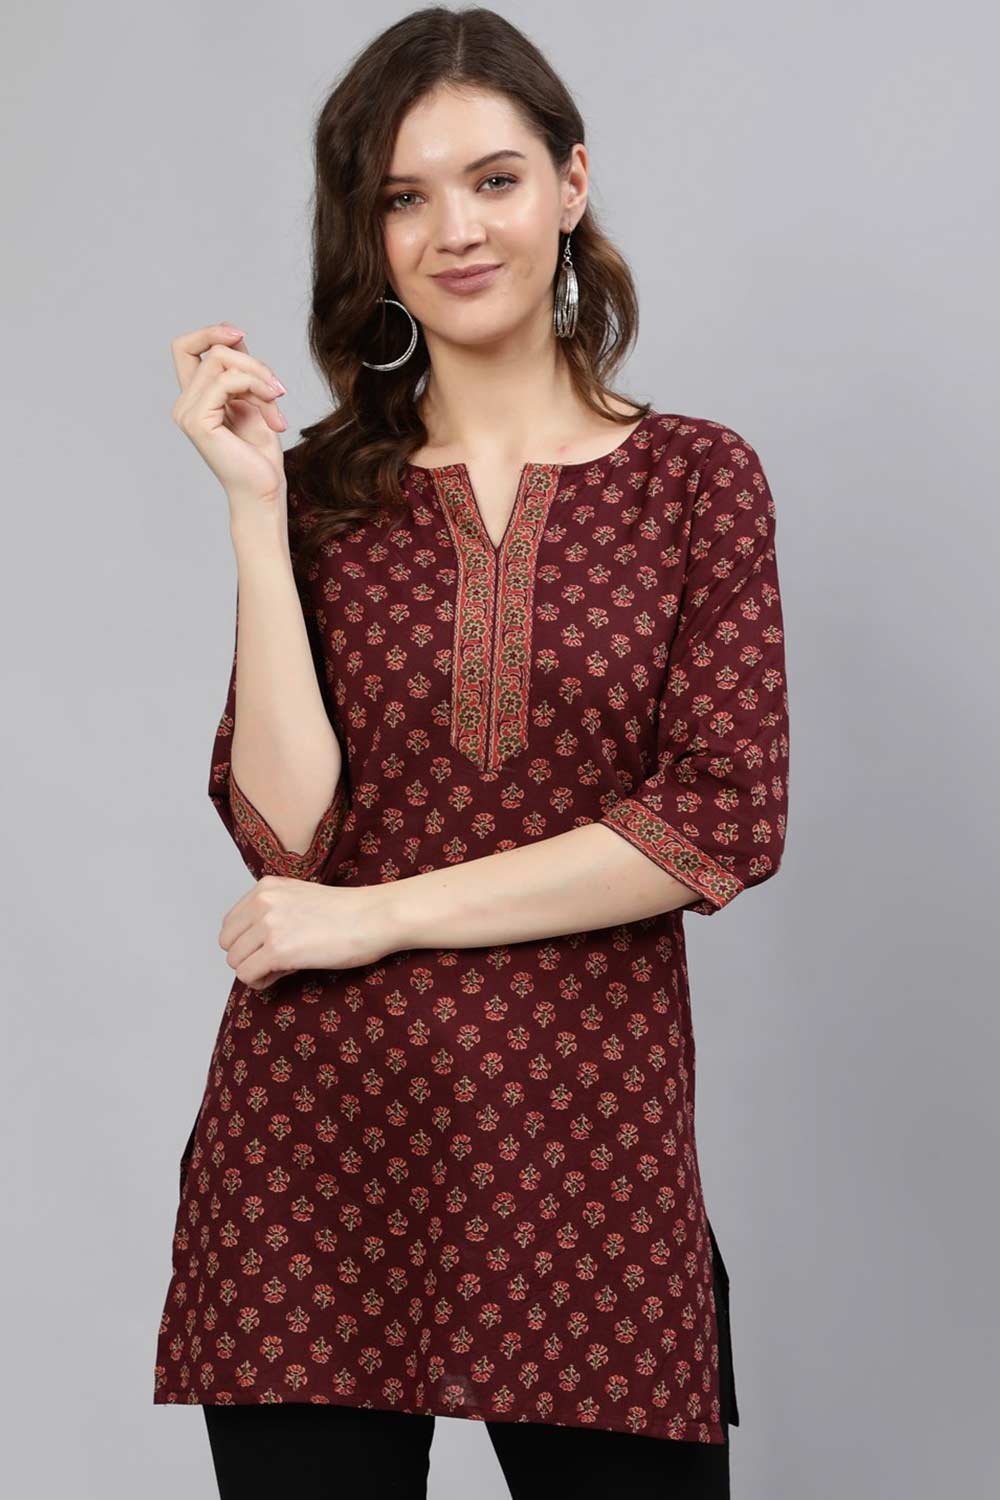 Buy Burgundy Cotton Floral Printed Tunic Online